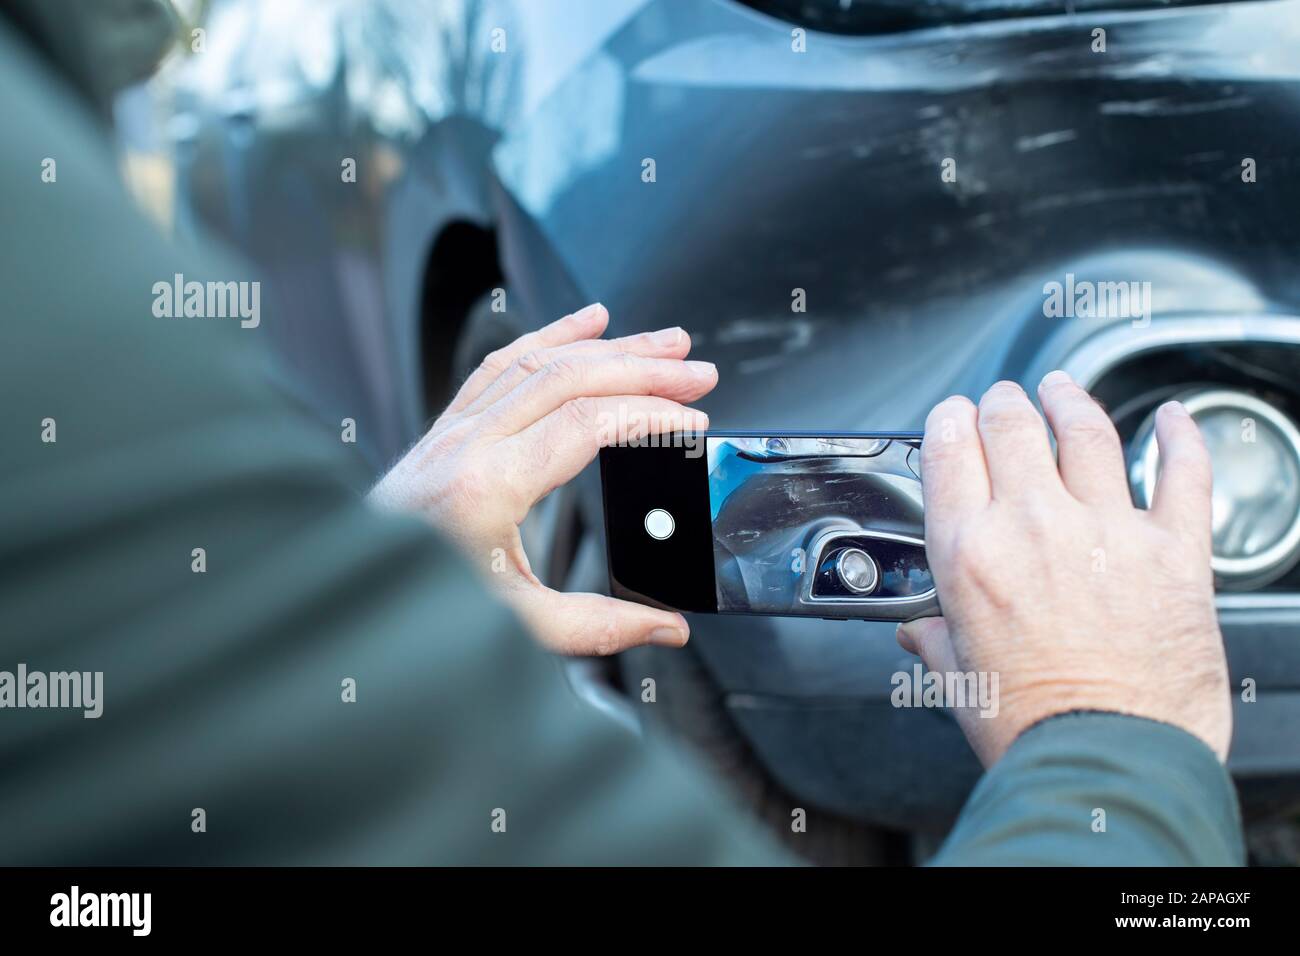 Male Driver Taking Photo Of Damaged Car After Accident For Insurance Claim On Mobile Phone Stock Photo